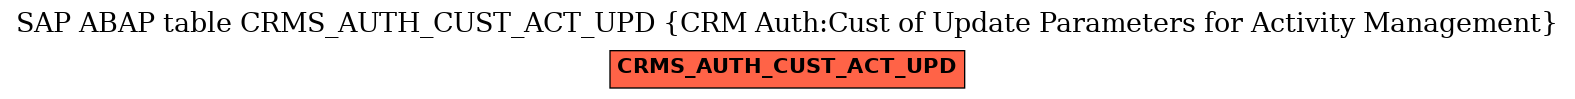 E-R Diagram for table CRMS_AUTH_CUST_ACT_UPD (CRM Auth:Cust of Update Parameters for Activity Management)